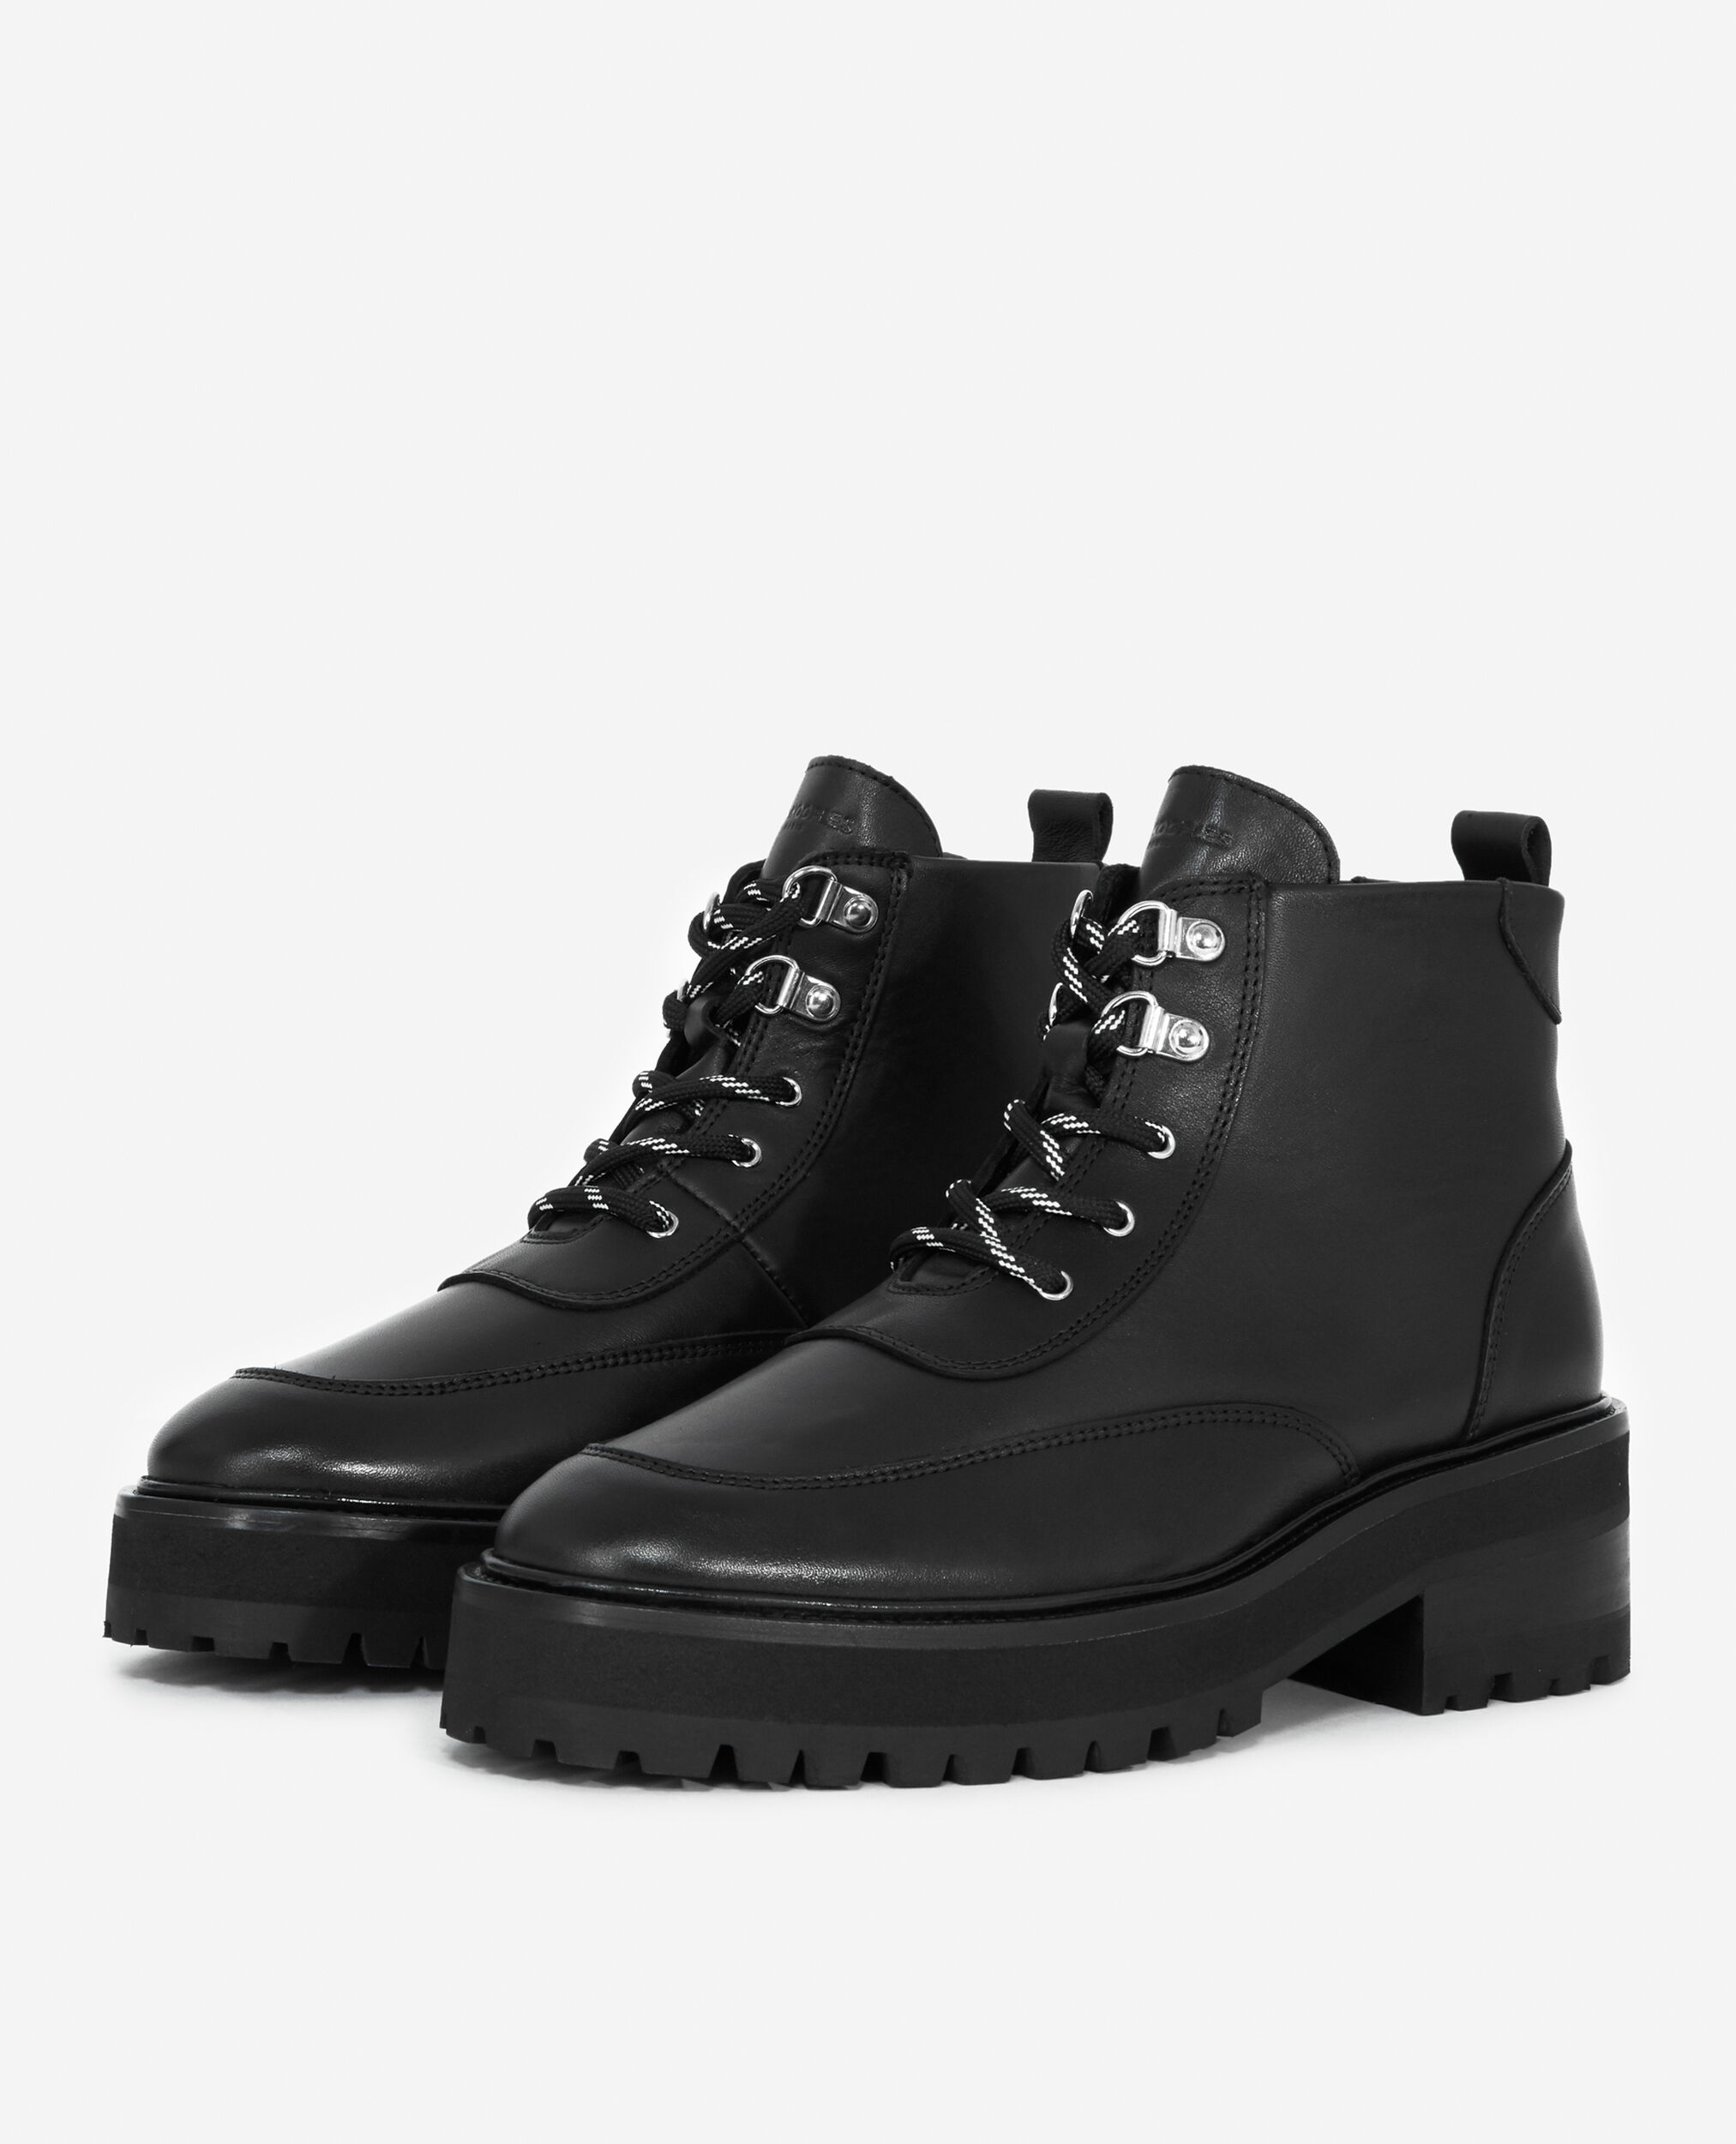 Flat black leather boots in ranger style, BLACK, hi-res image number null